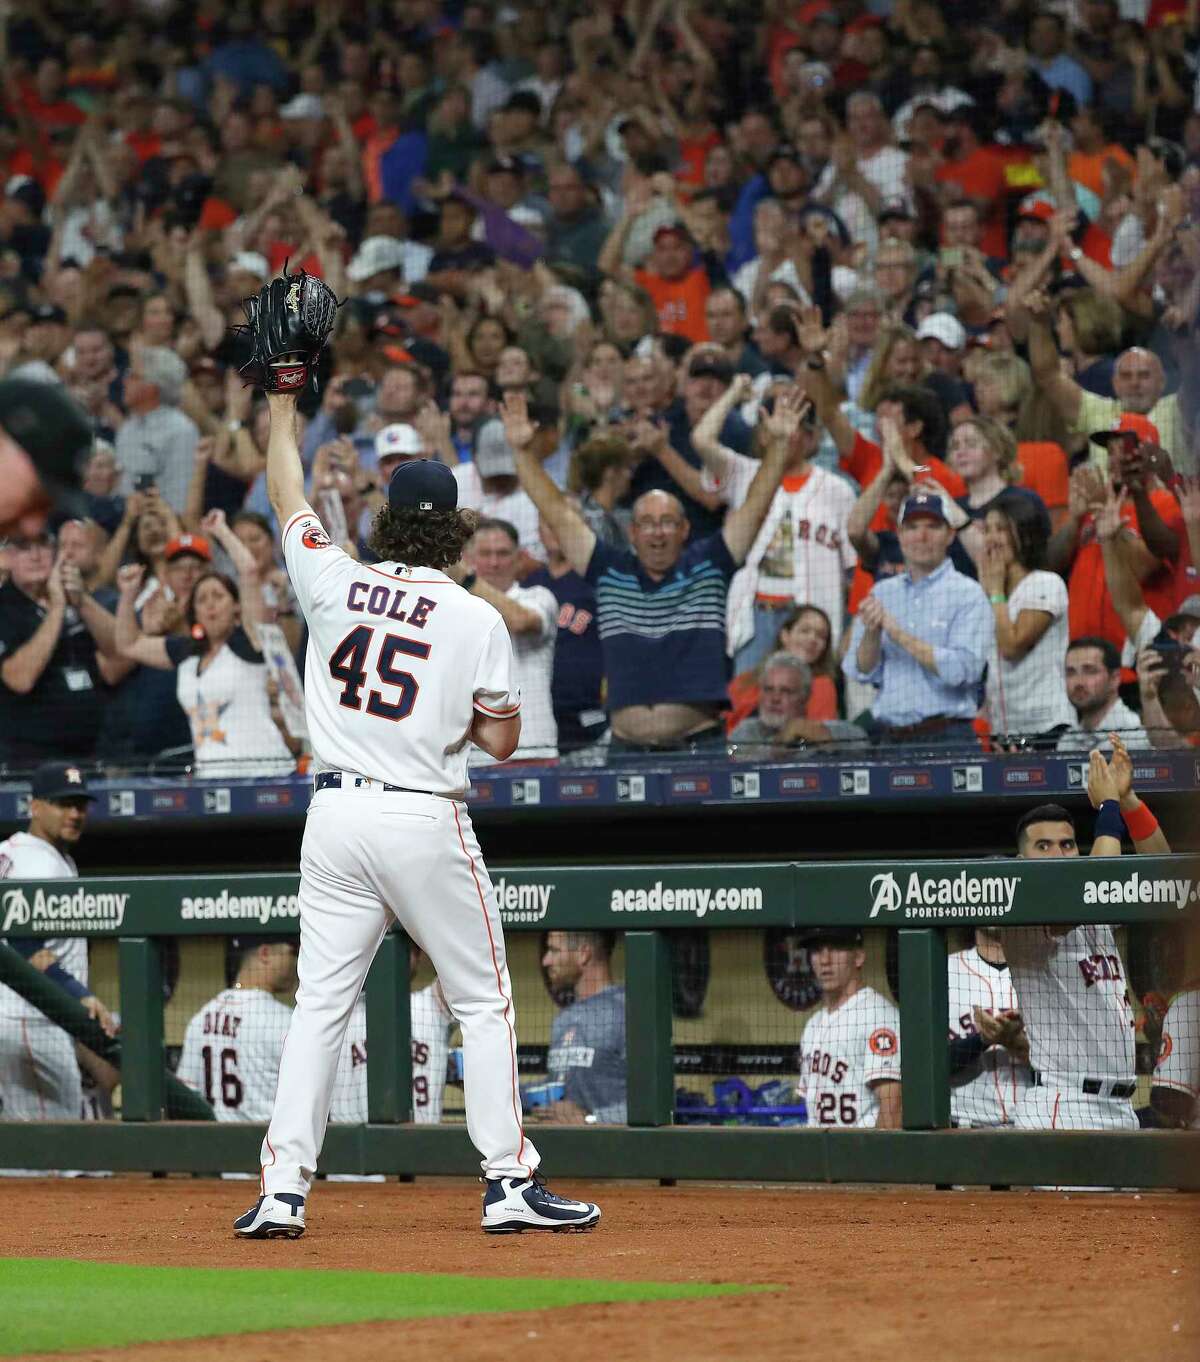 Houston Astros starting pitcher Gerrit Cole (45) waves to the fans after striking out Texas Rangers Shin-Soo Choo in the sixth inning to record his 300th strikeout this year during an MLB baseball game at Minute Maid Park, Wednesday, Sept. 18, 2019, in Houston.